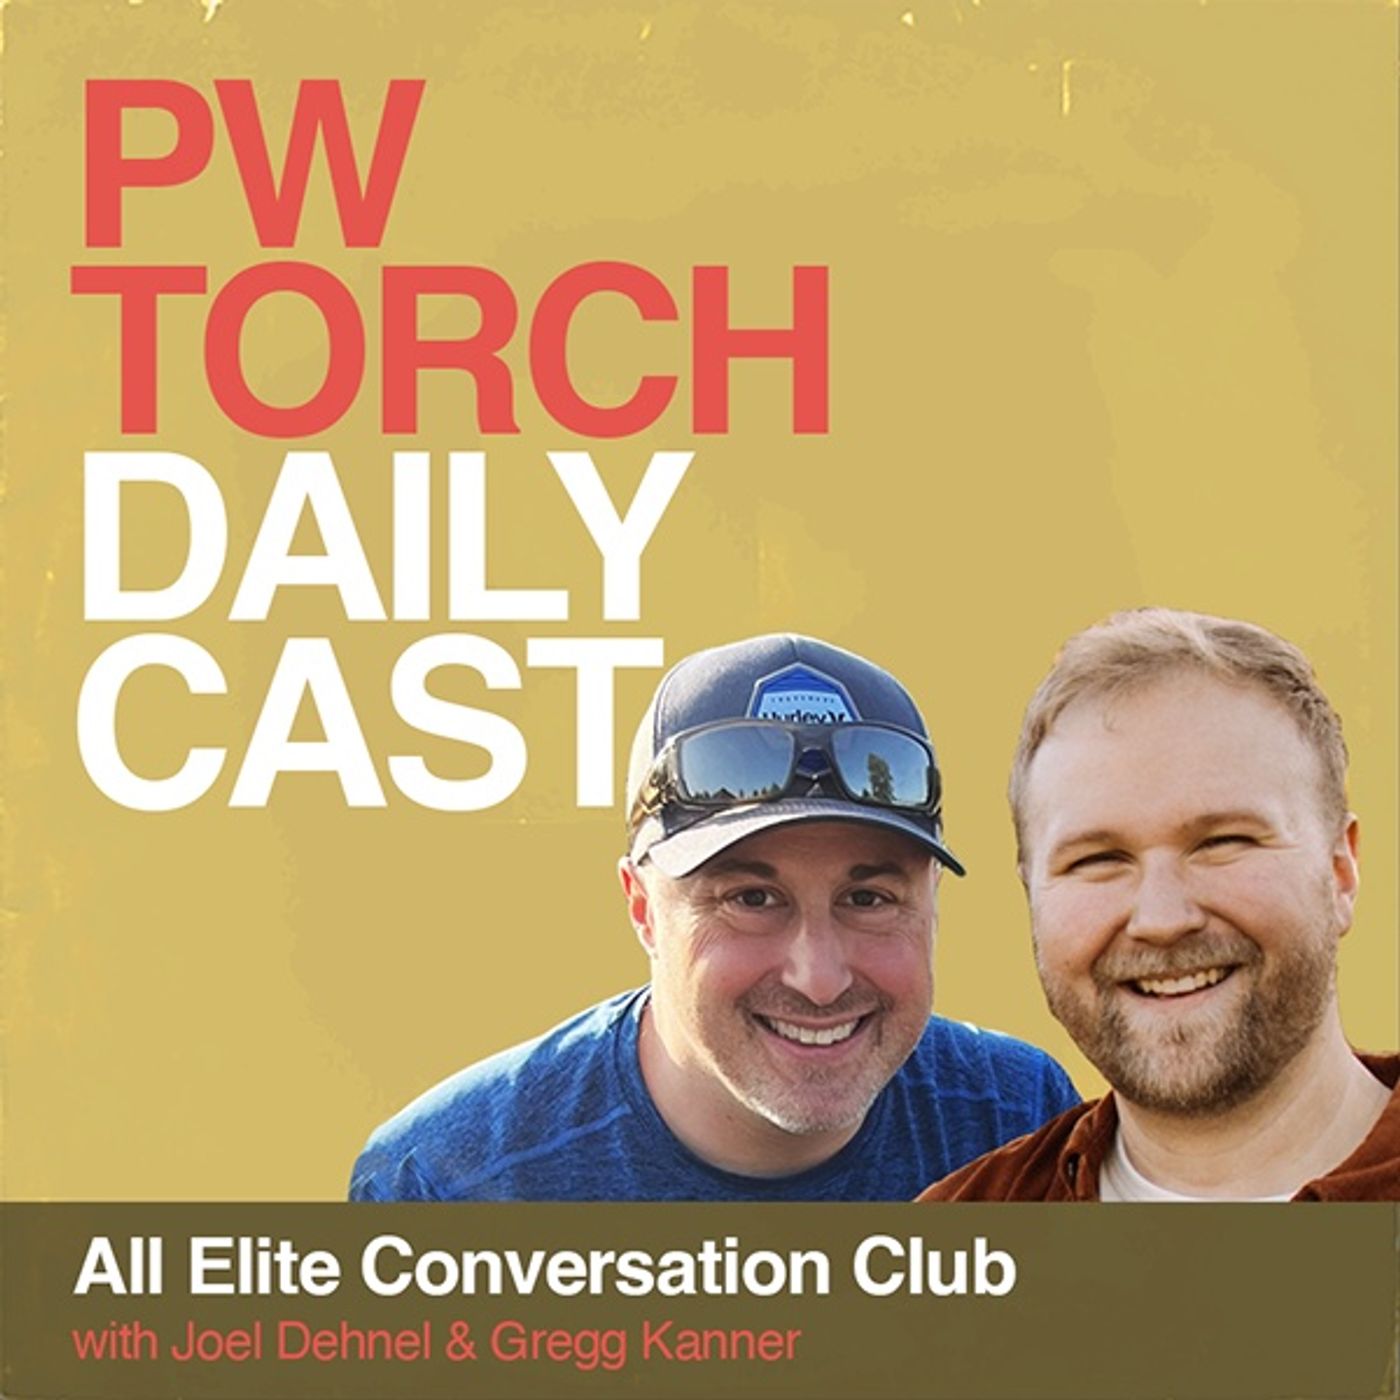 All Elite Conversation Club - Dehnel & Kanner talk the week’s AEW TV and build to Revolution, top 20 AEW TV stars and whether heels or faces